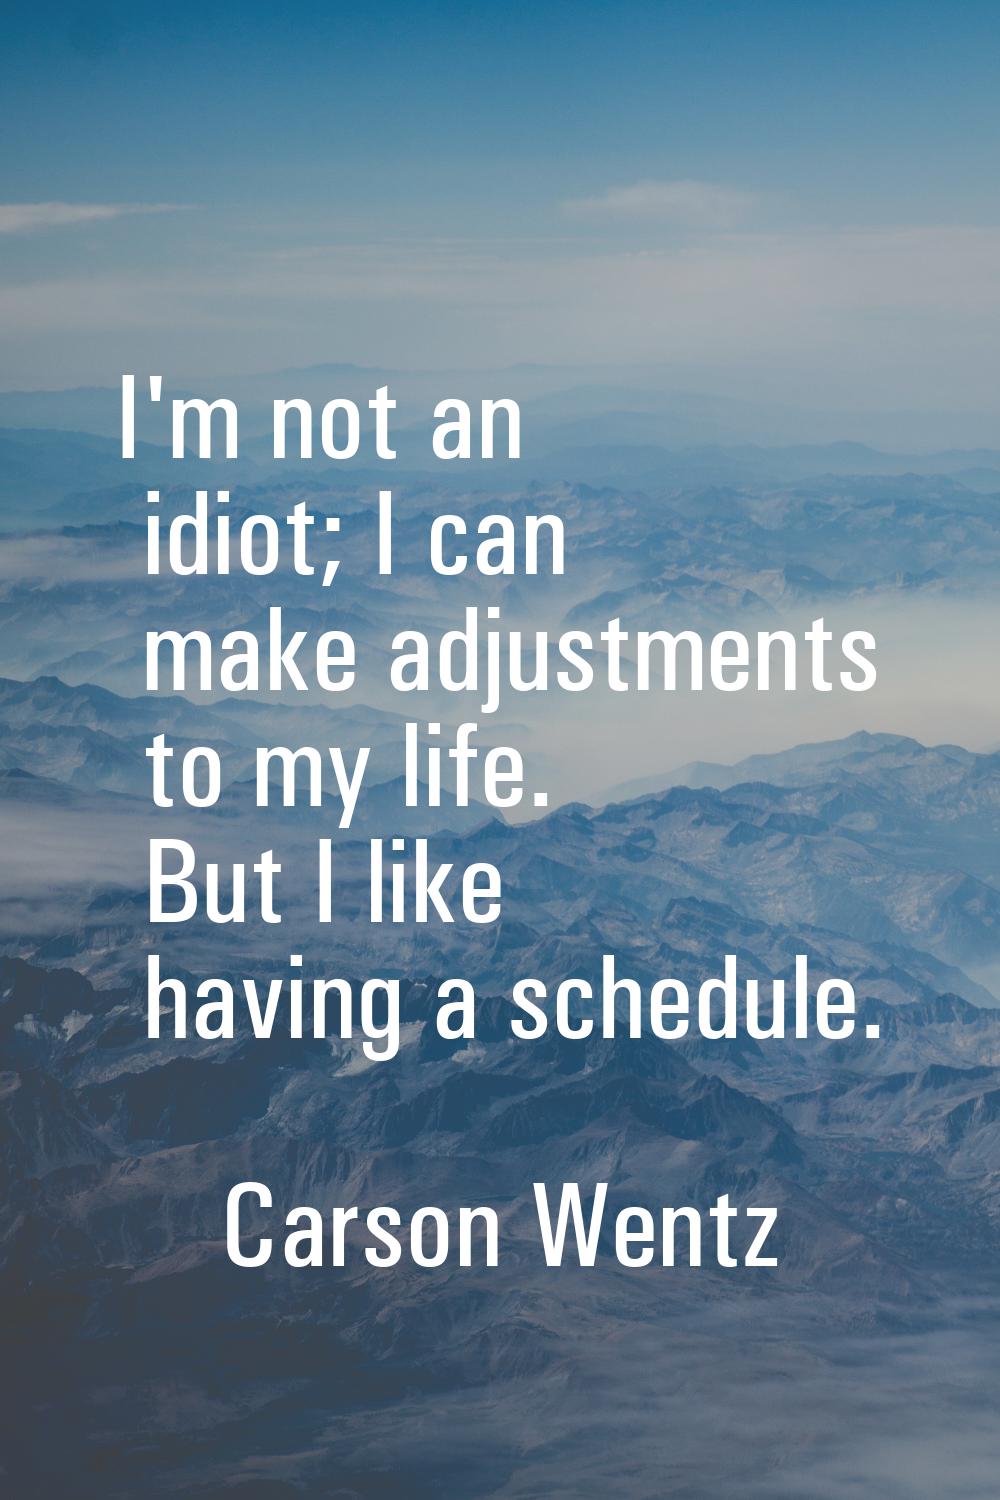 I'm not an idiot; I can make adjustments to my life. But I like having a schedule.